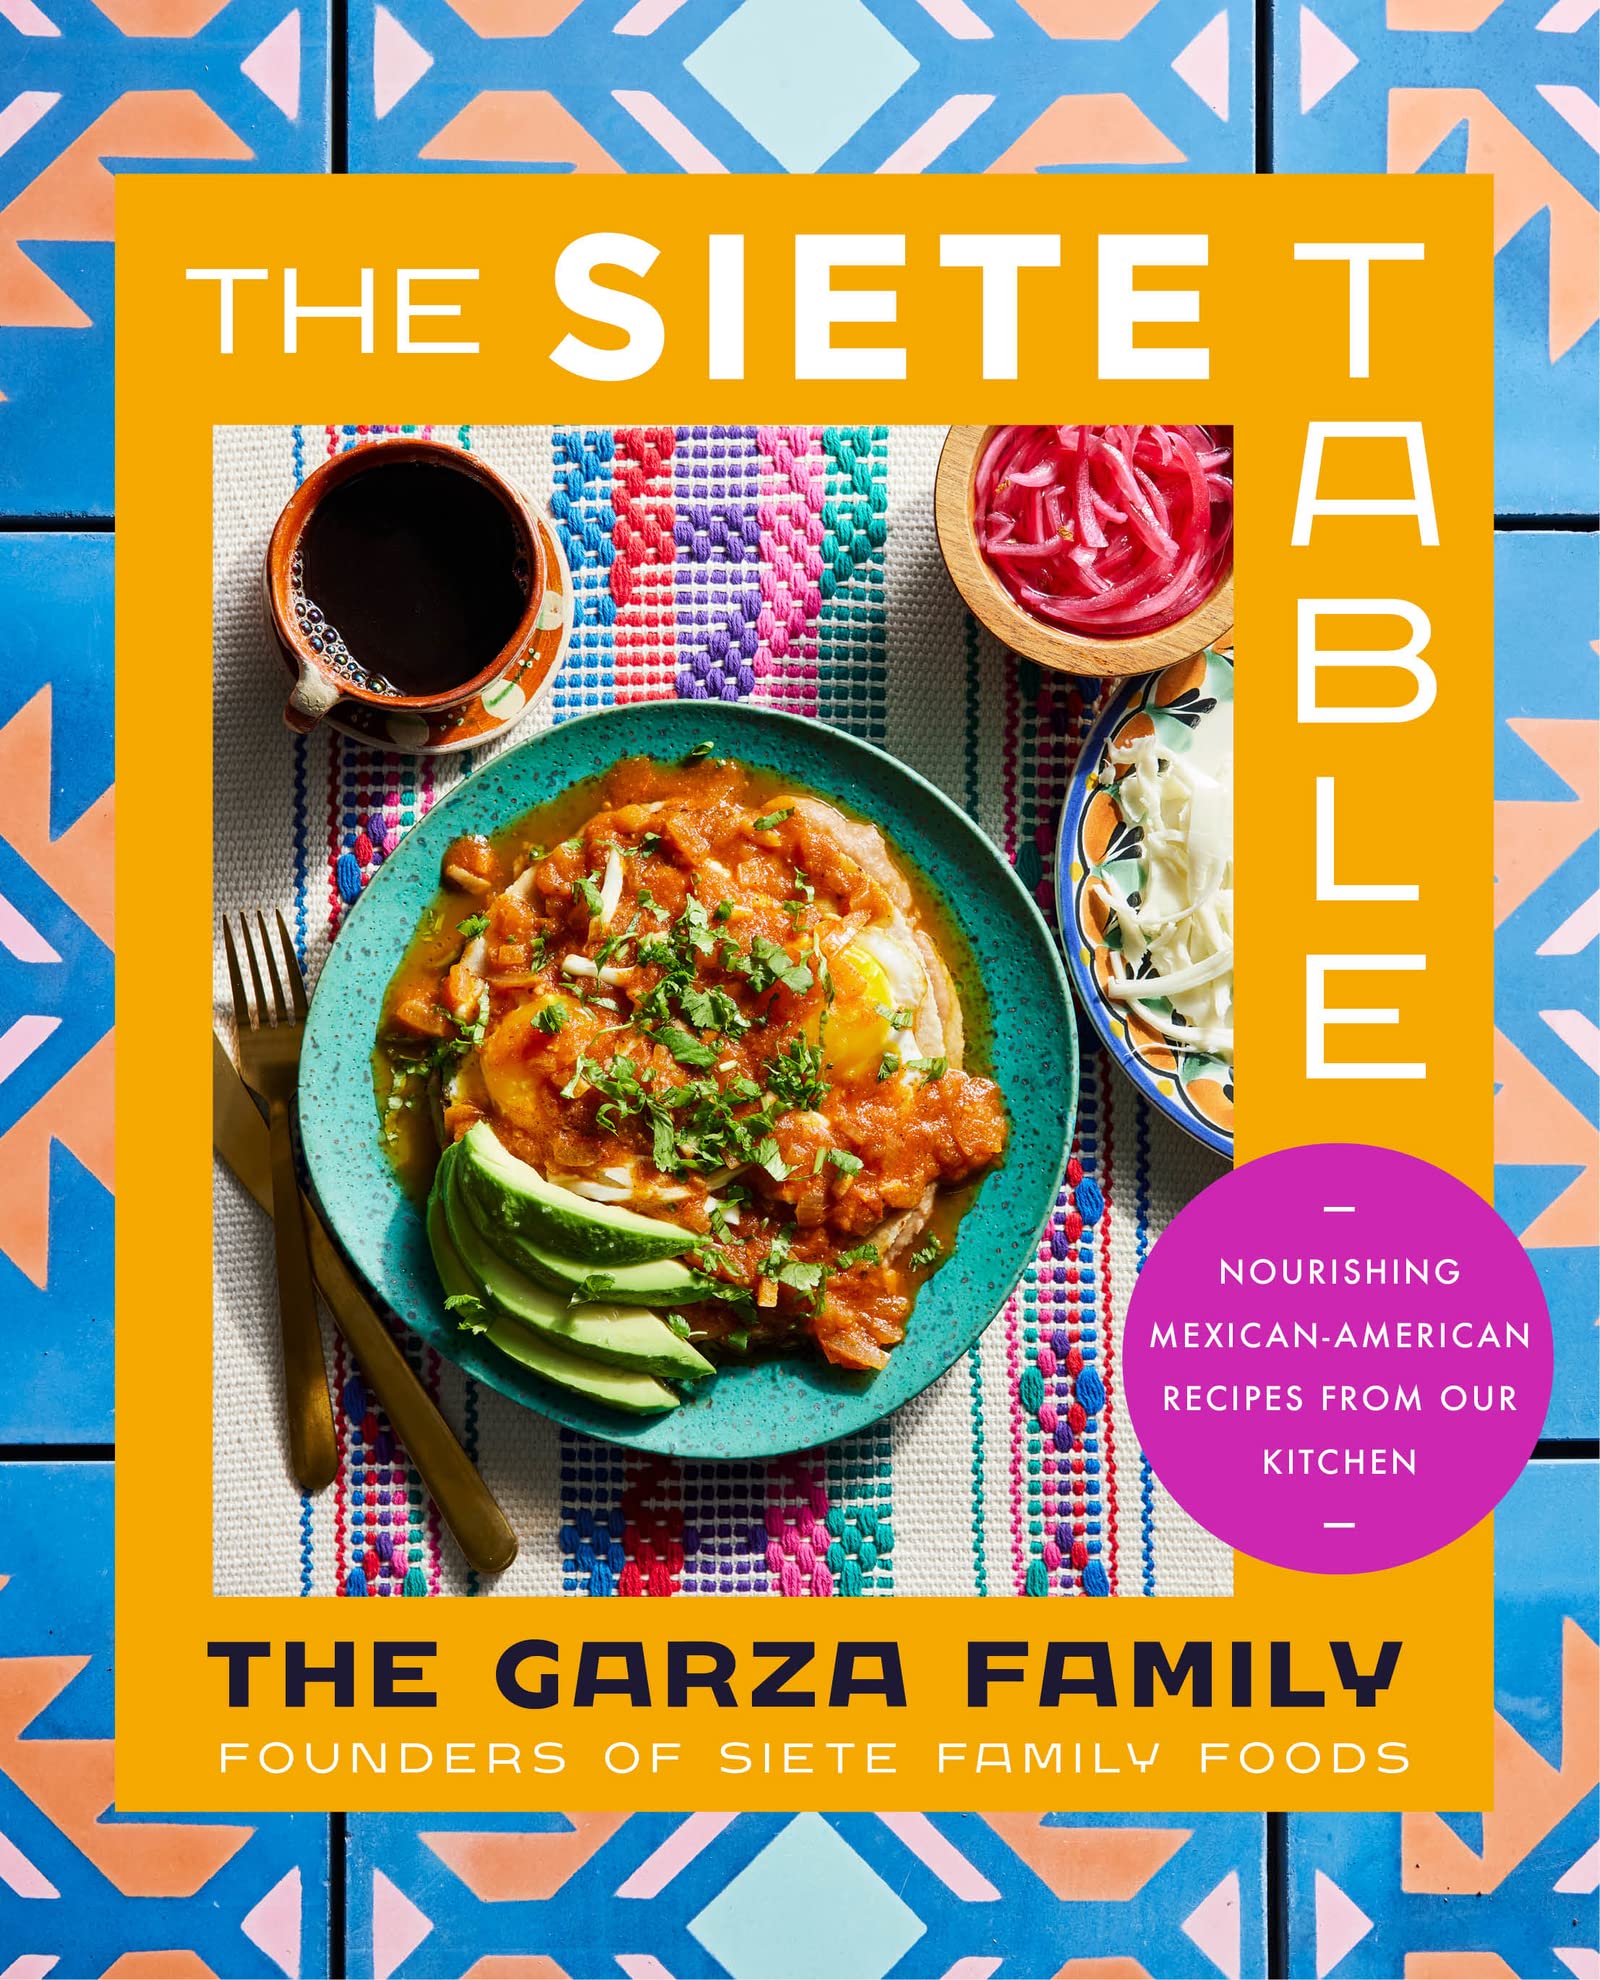 The Siete Table: Nourishing Mexican-American Recipes from Our Kitchen (The Garza Family)